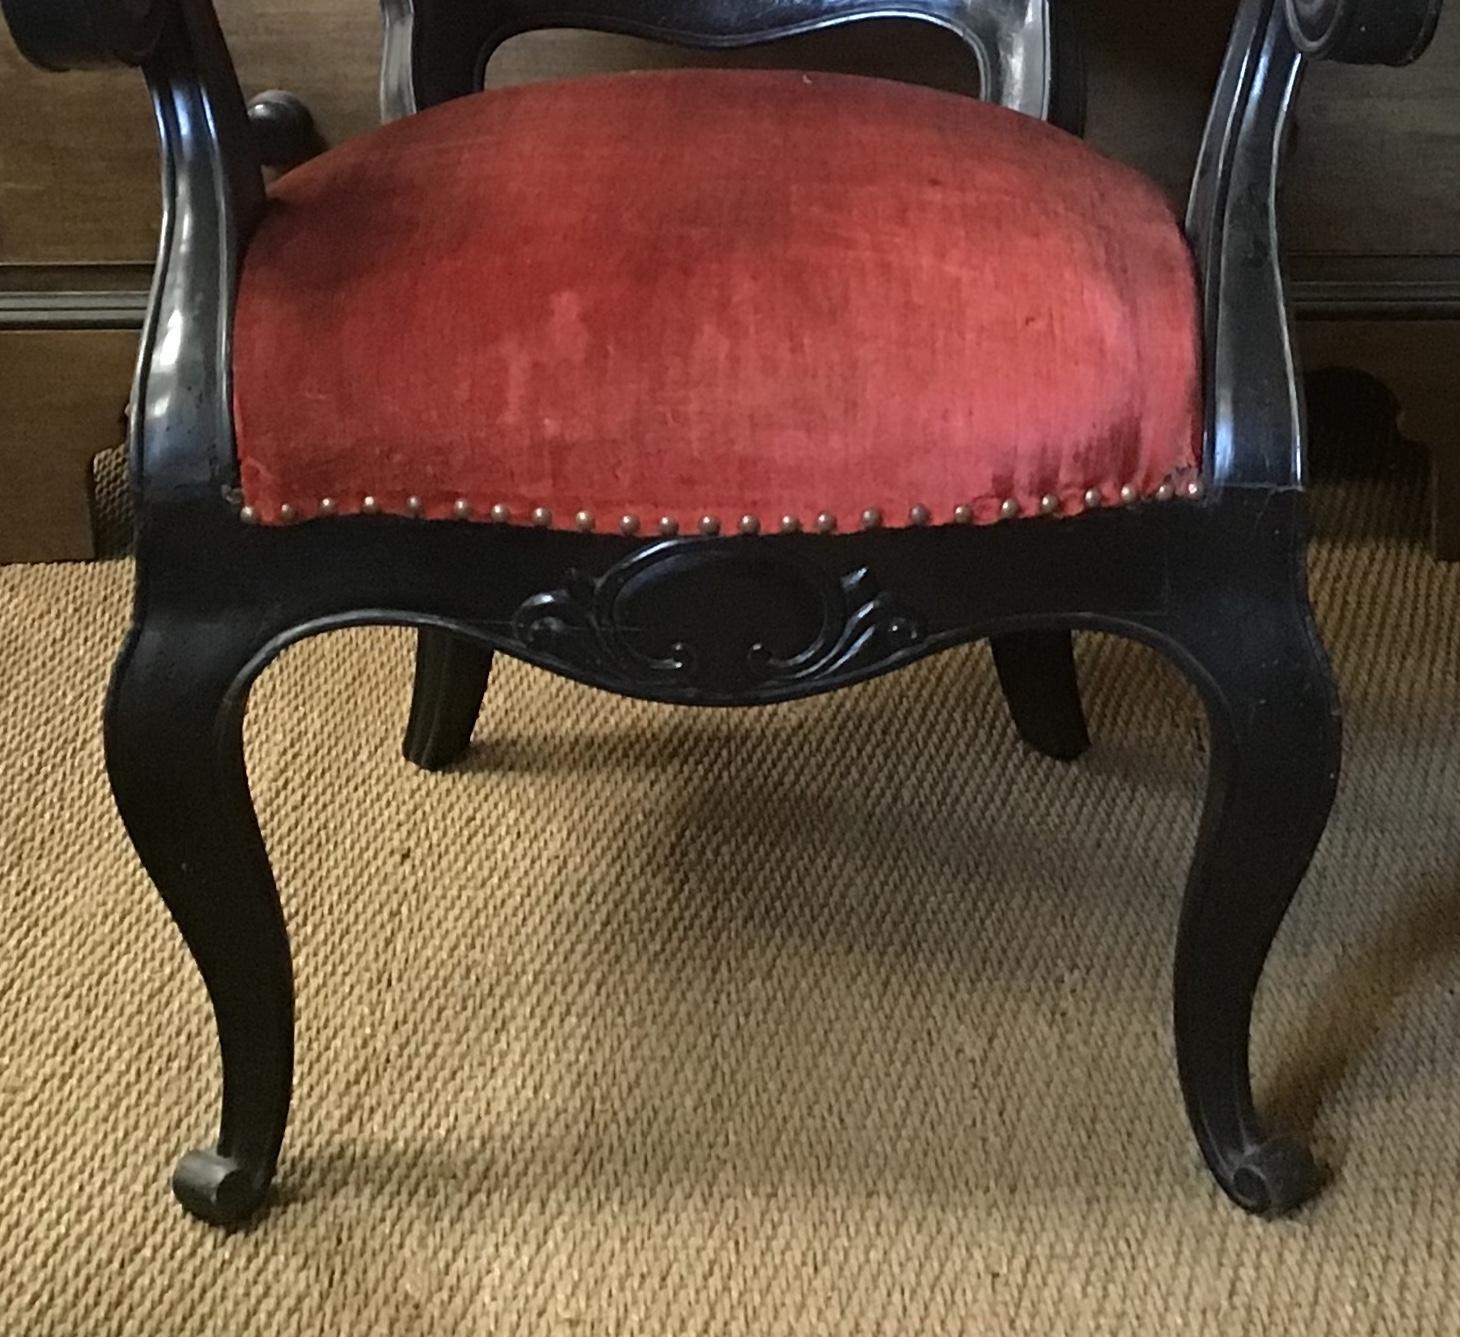 Baroque Revival 20th Century French Upholstered Armchair in Carved Ebonized Wood from 1920 For Sale